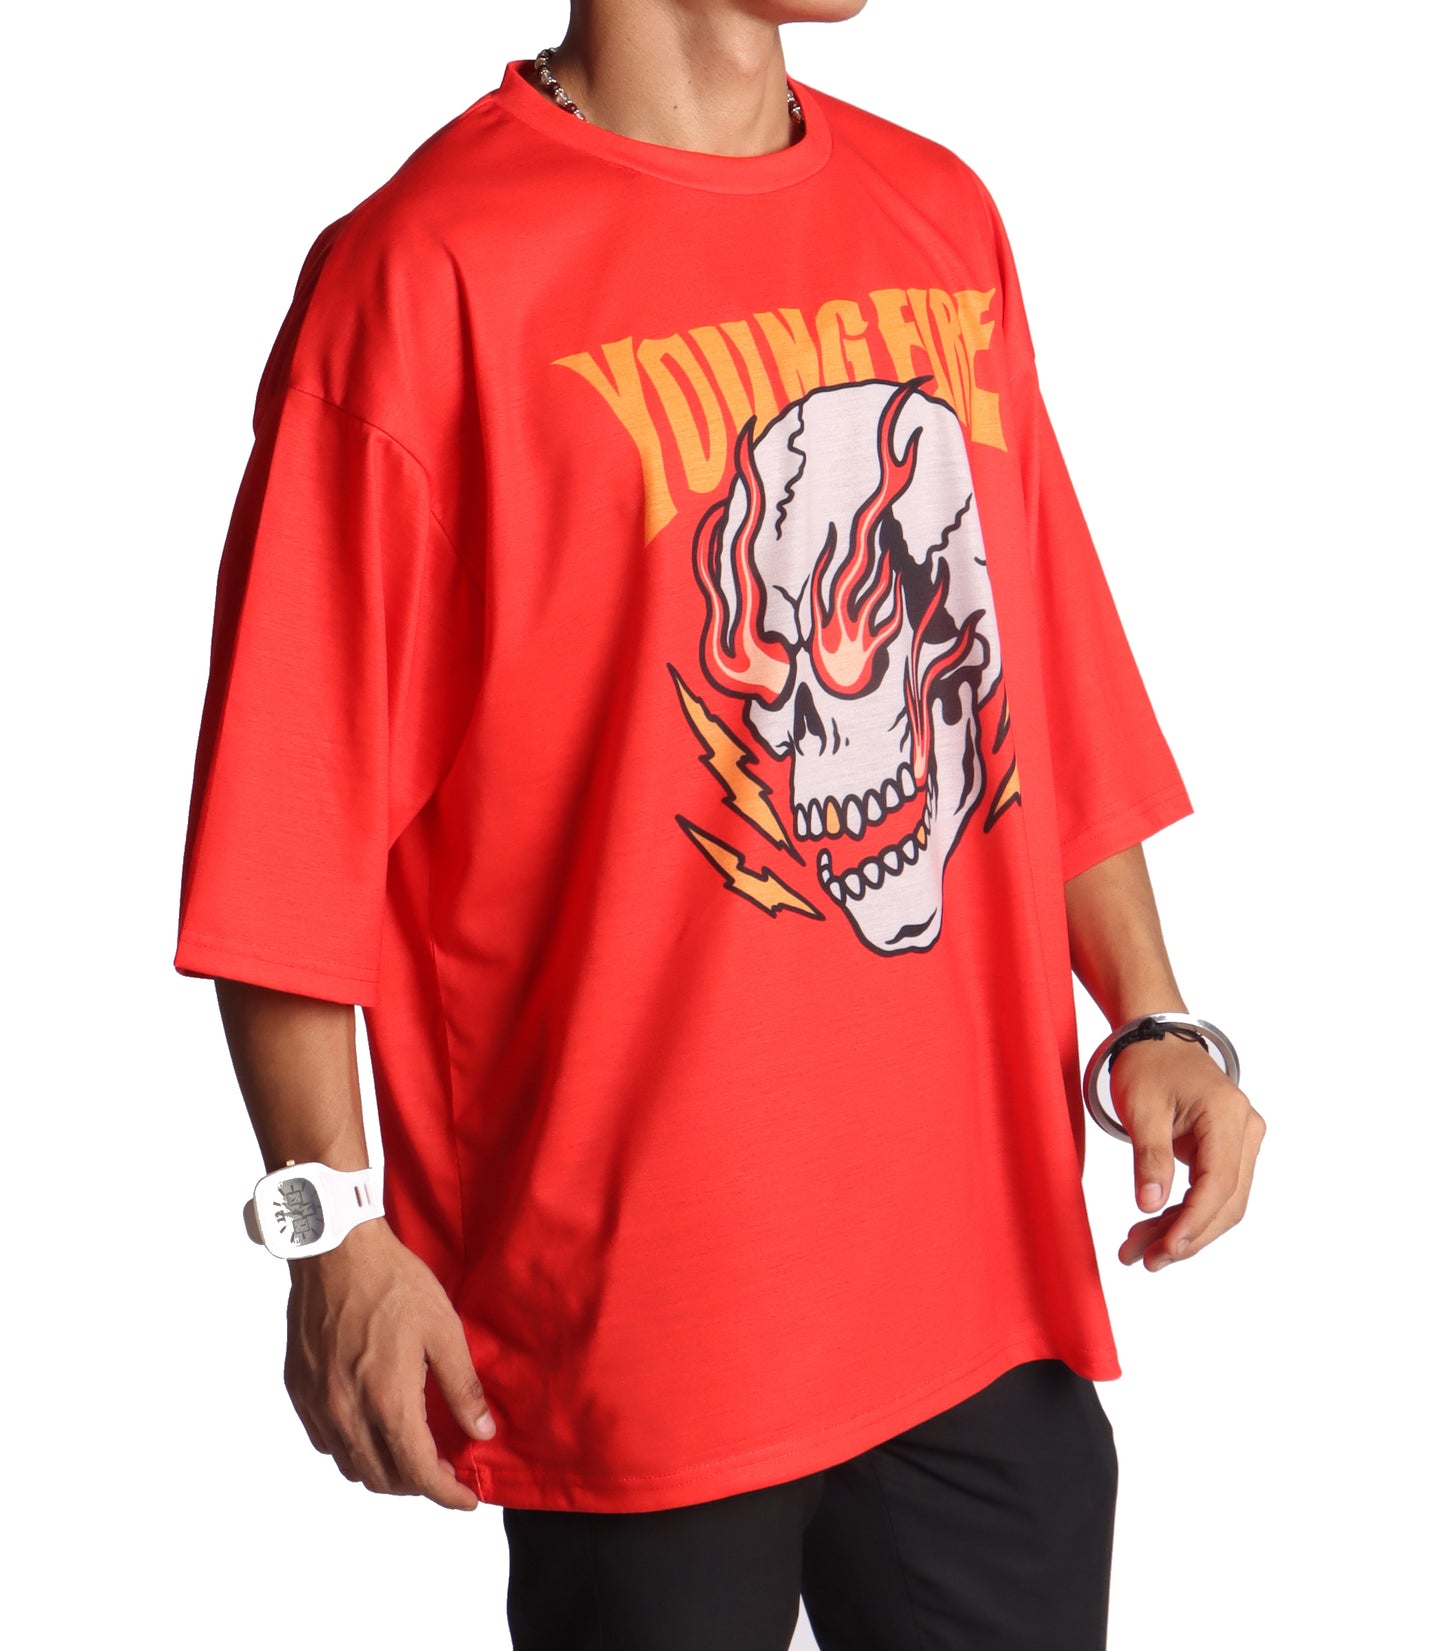 YOUNG FIRE OVERSIZE TEE#3